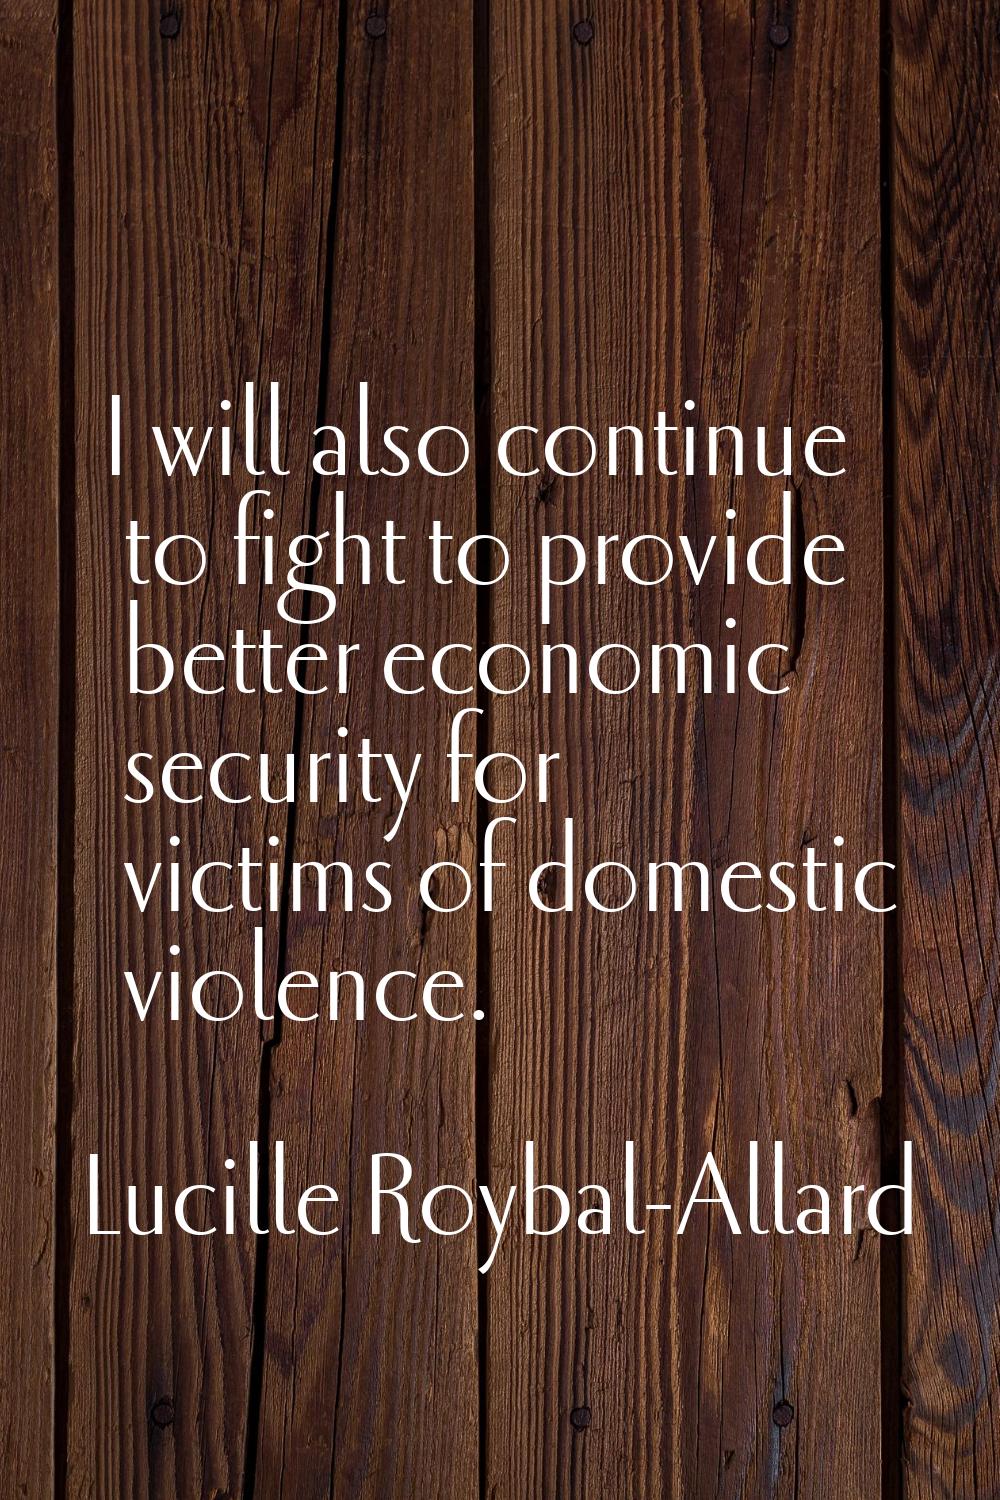 I will also continue to fight to provide better economic security for victims of domestic violence.